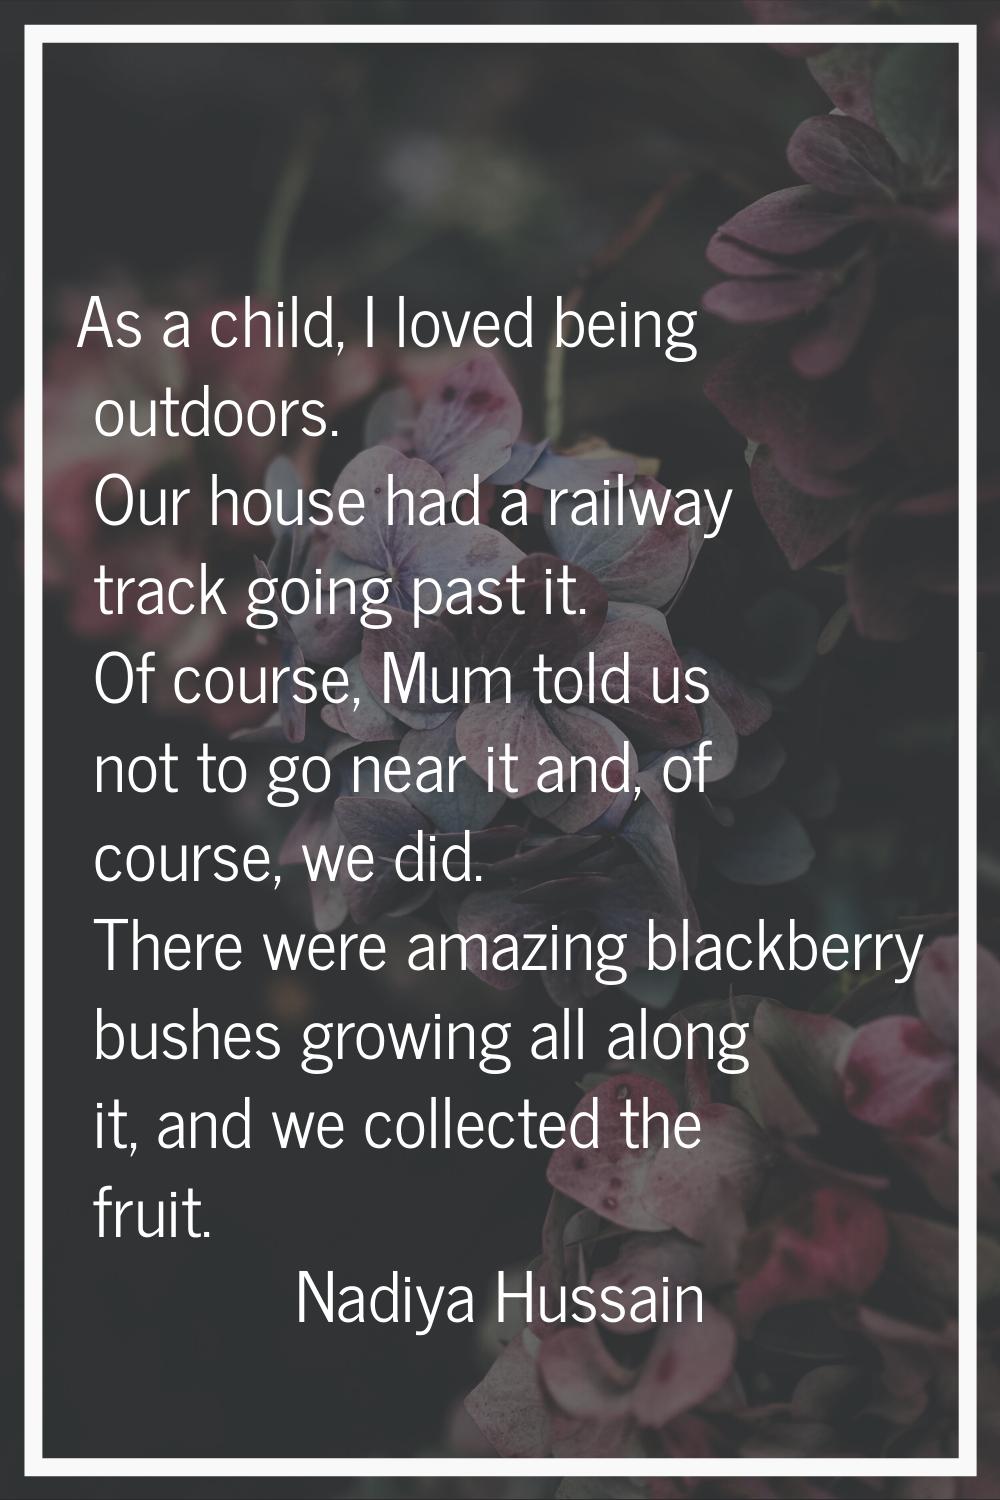 As a child, I loved being outdoors. Our house had a railway track going past it. Of course, Mum tol